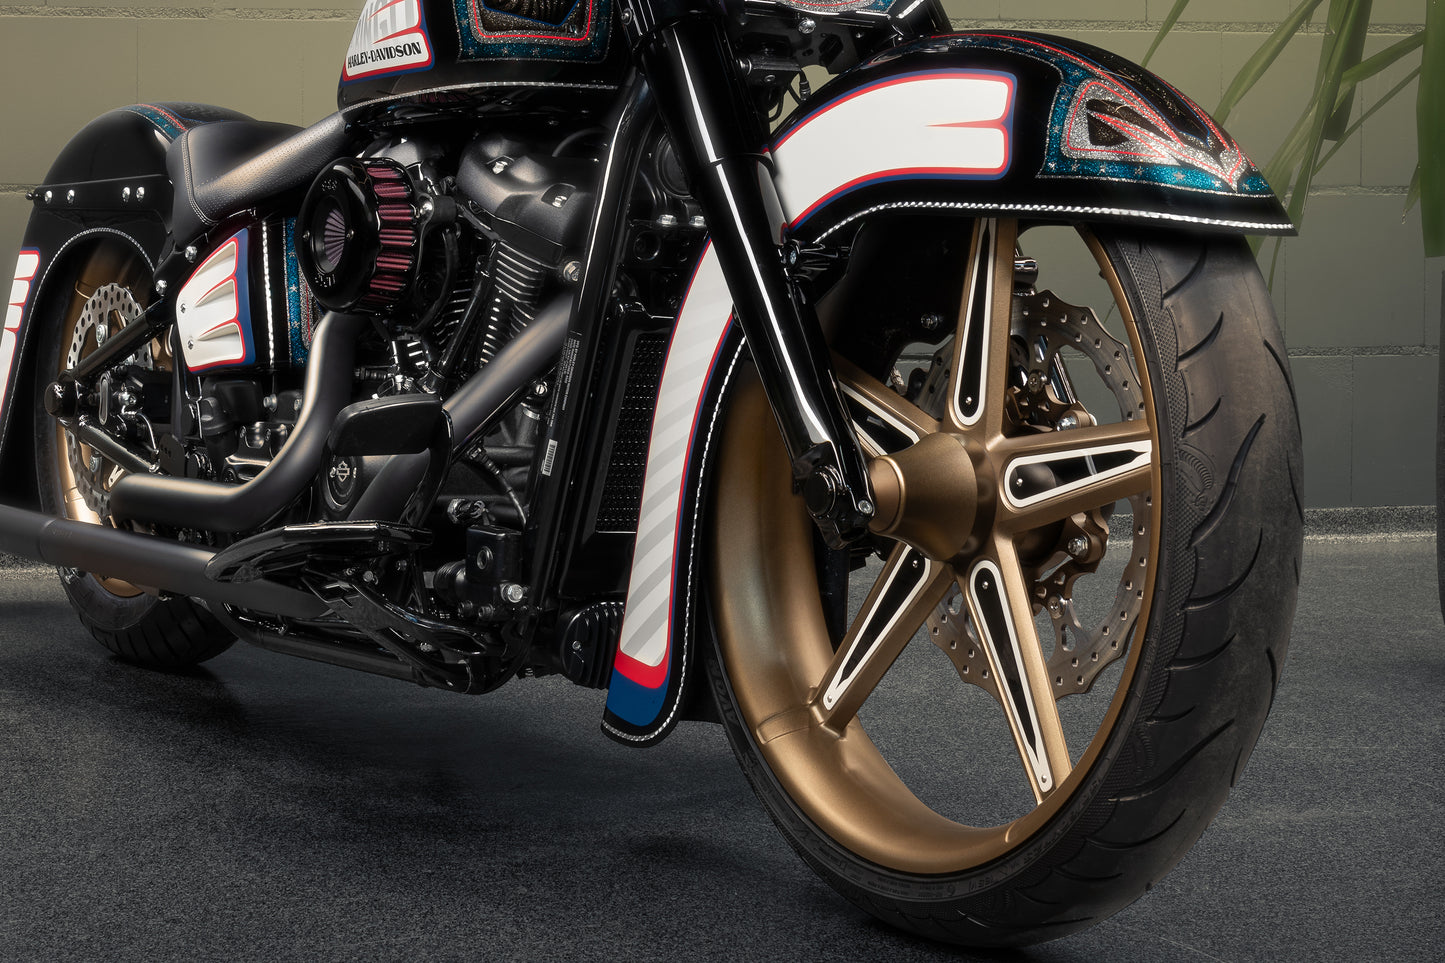 Harley Davidson motorcycle with Killer Custom "Hot rod series" front fender from the front in an industrial environment